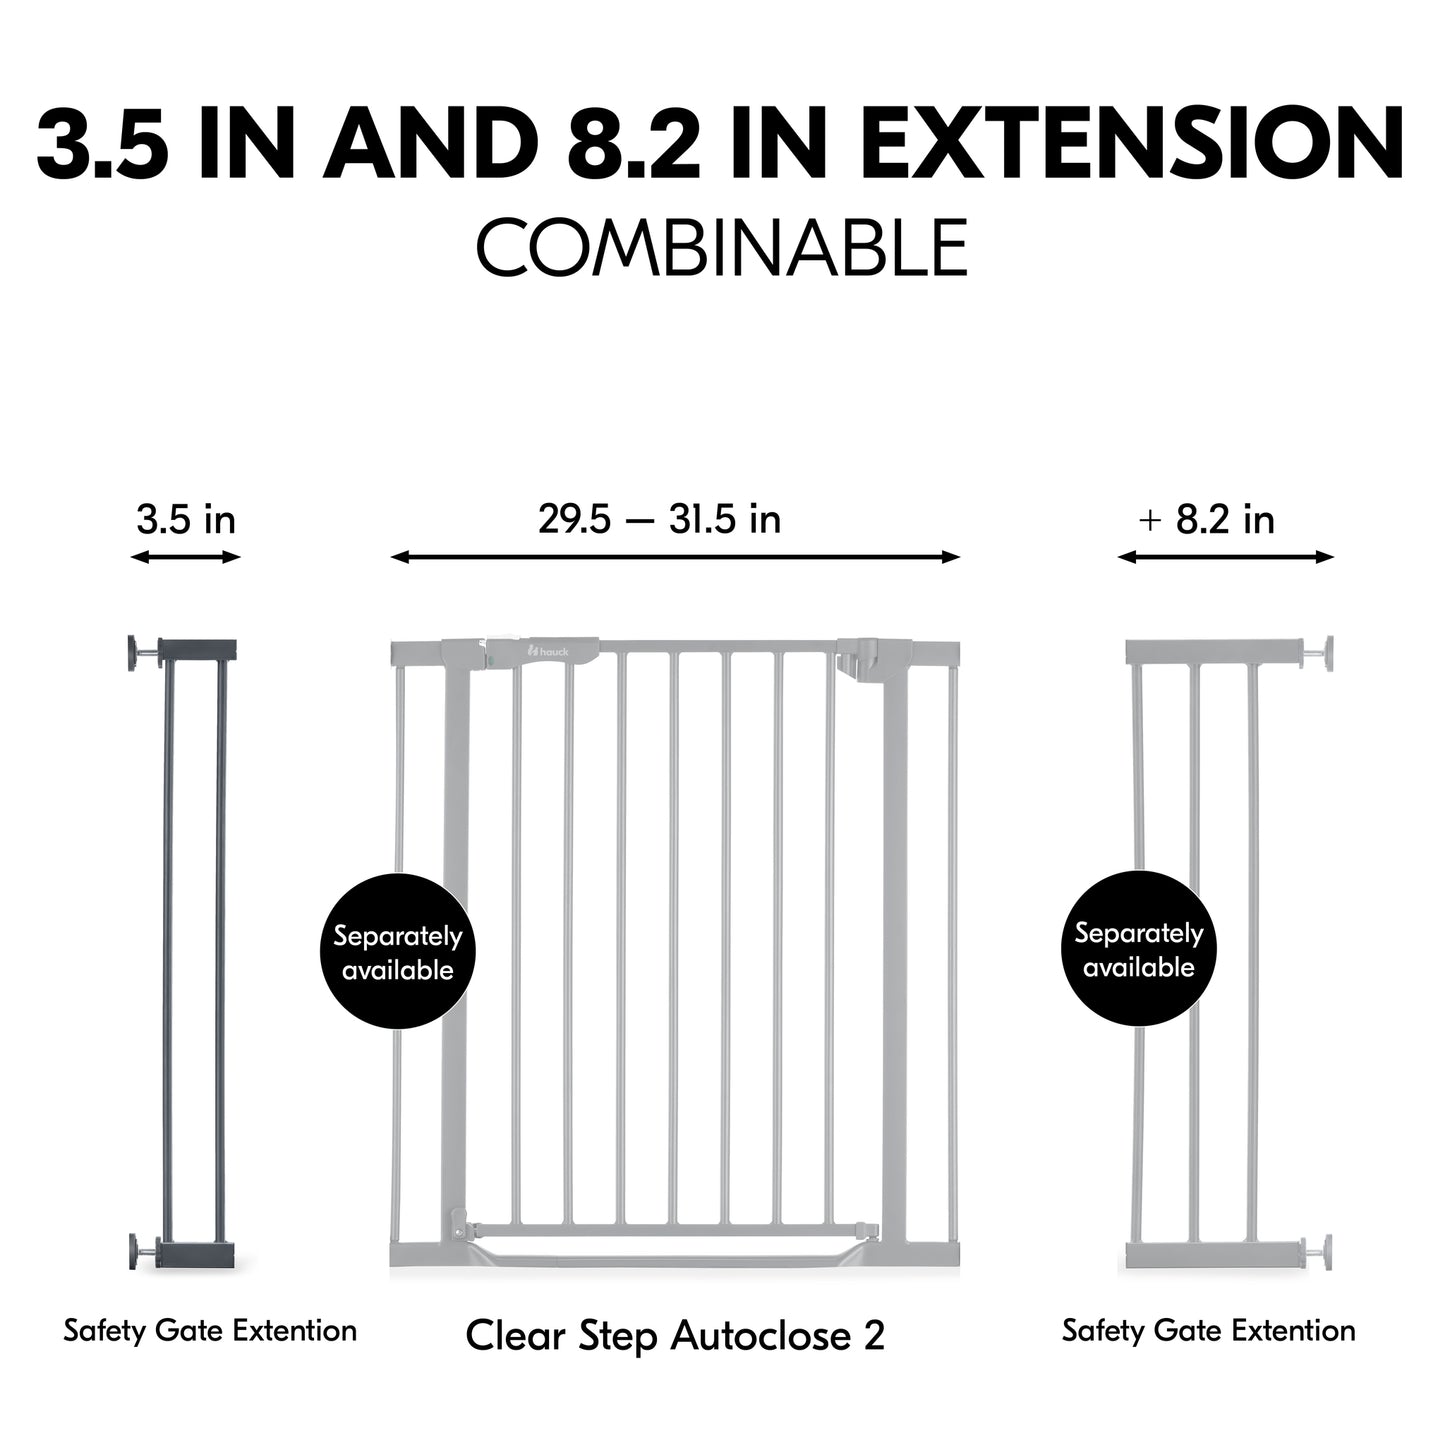 Safety Gate Extension 9 cm